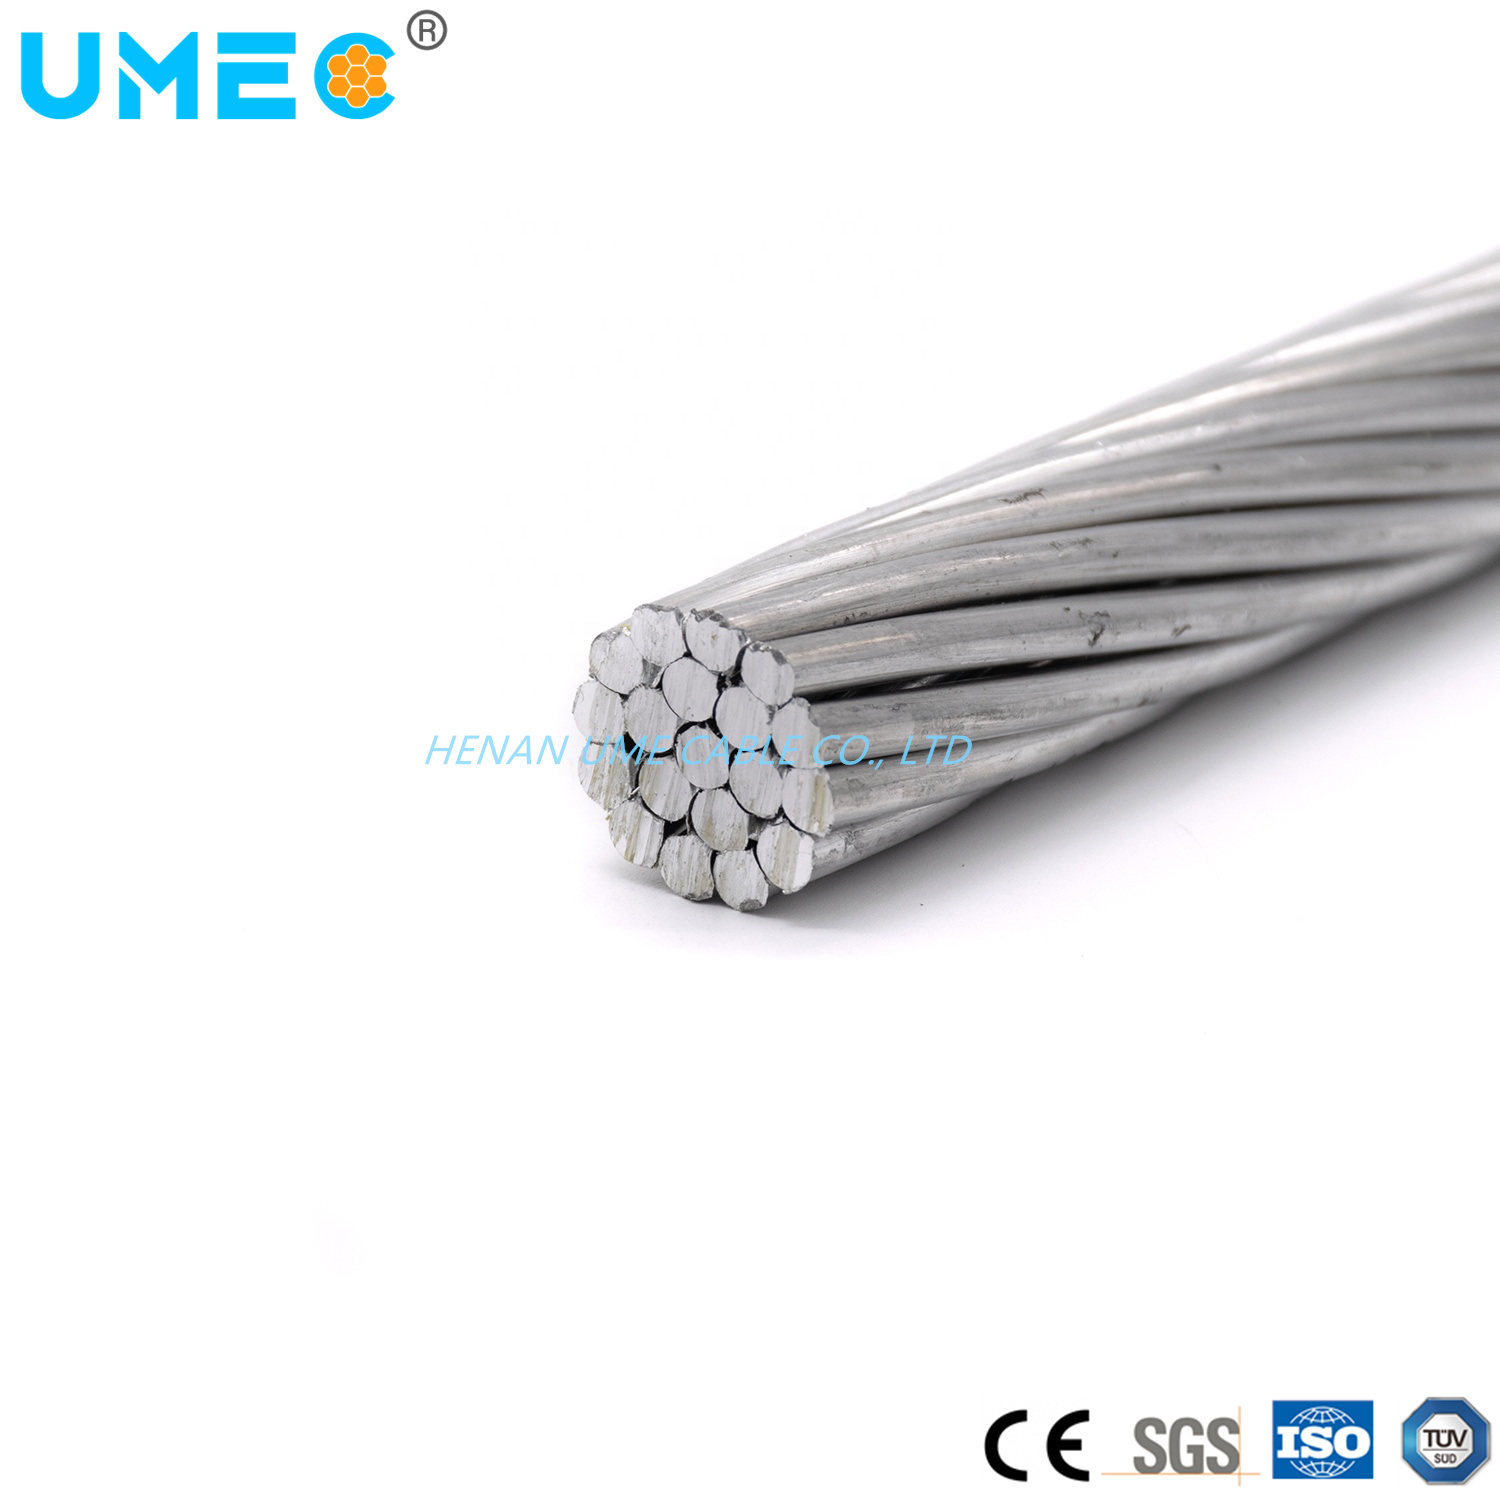 Hard-Drawn Aluminum Wires for Electric Purposes AAC